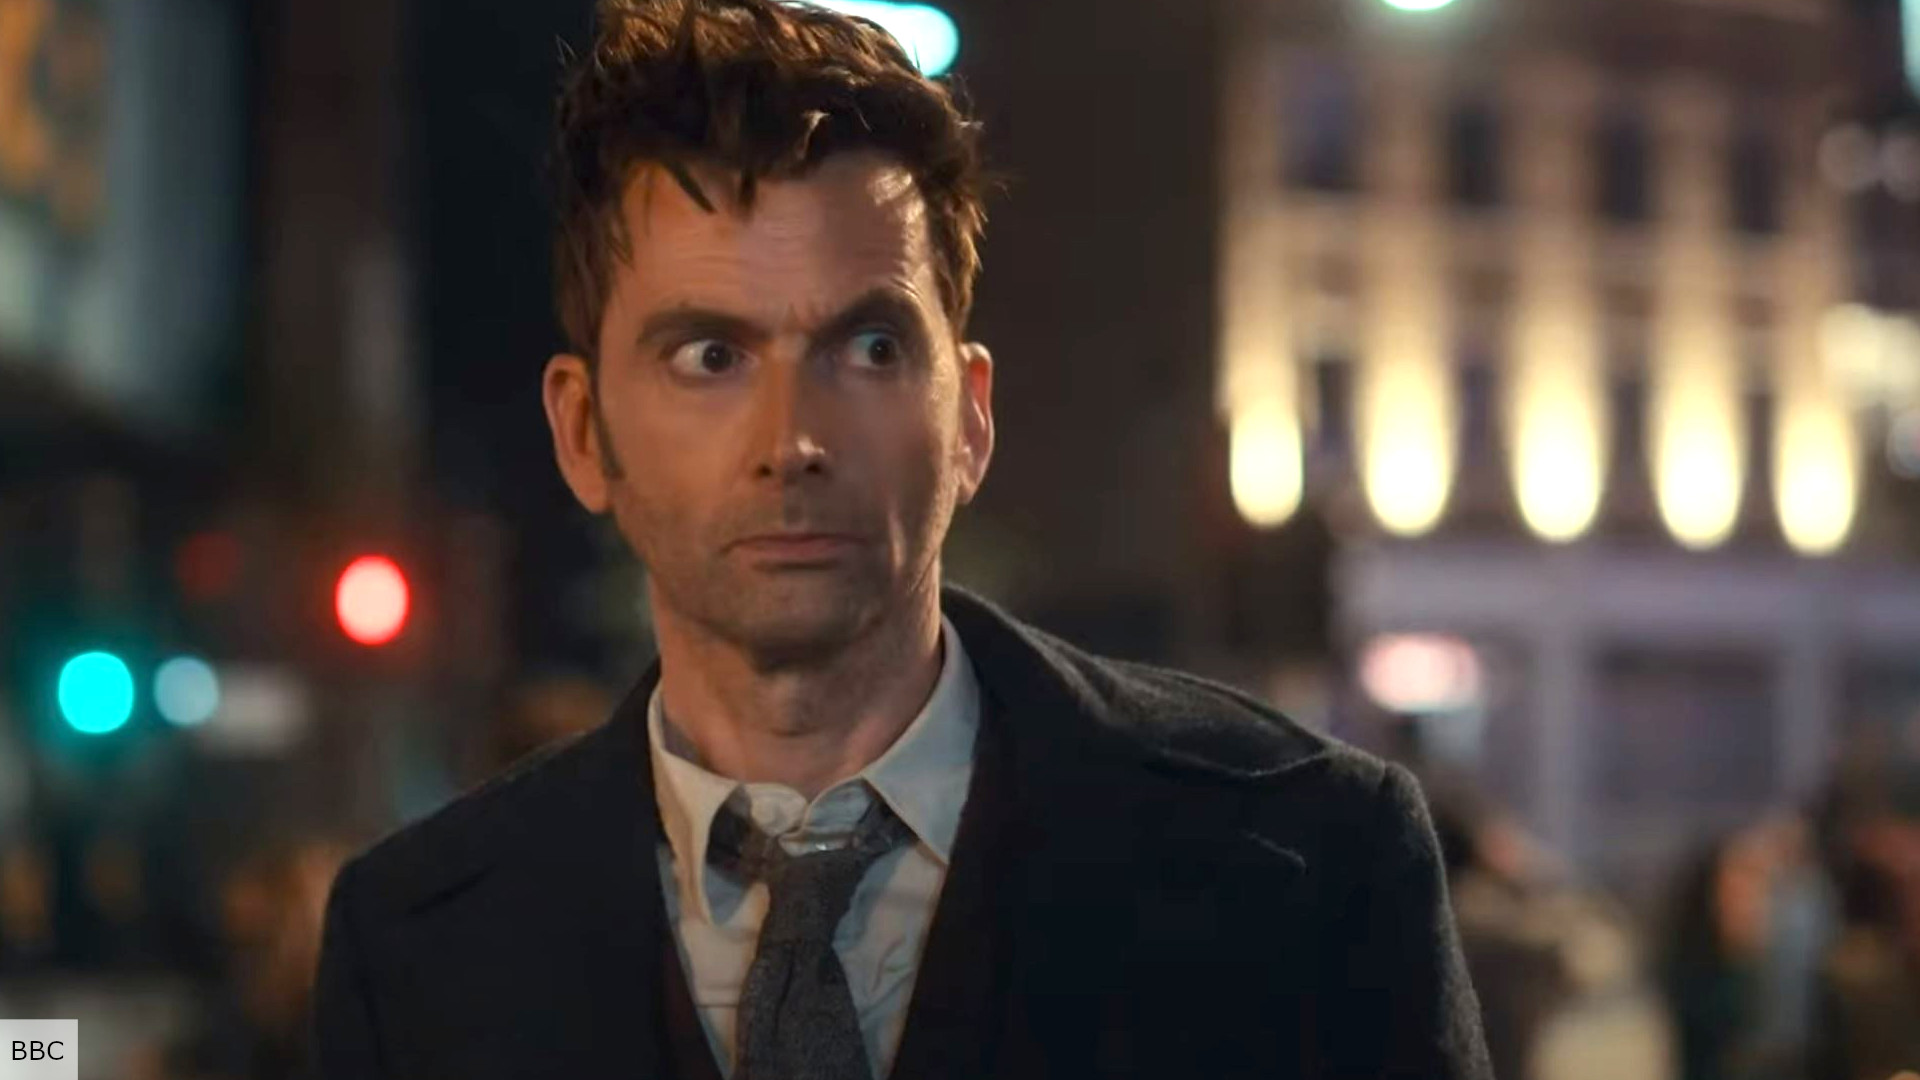 Doctor Who 60th anniversary release date, cast, trailer, and more news